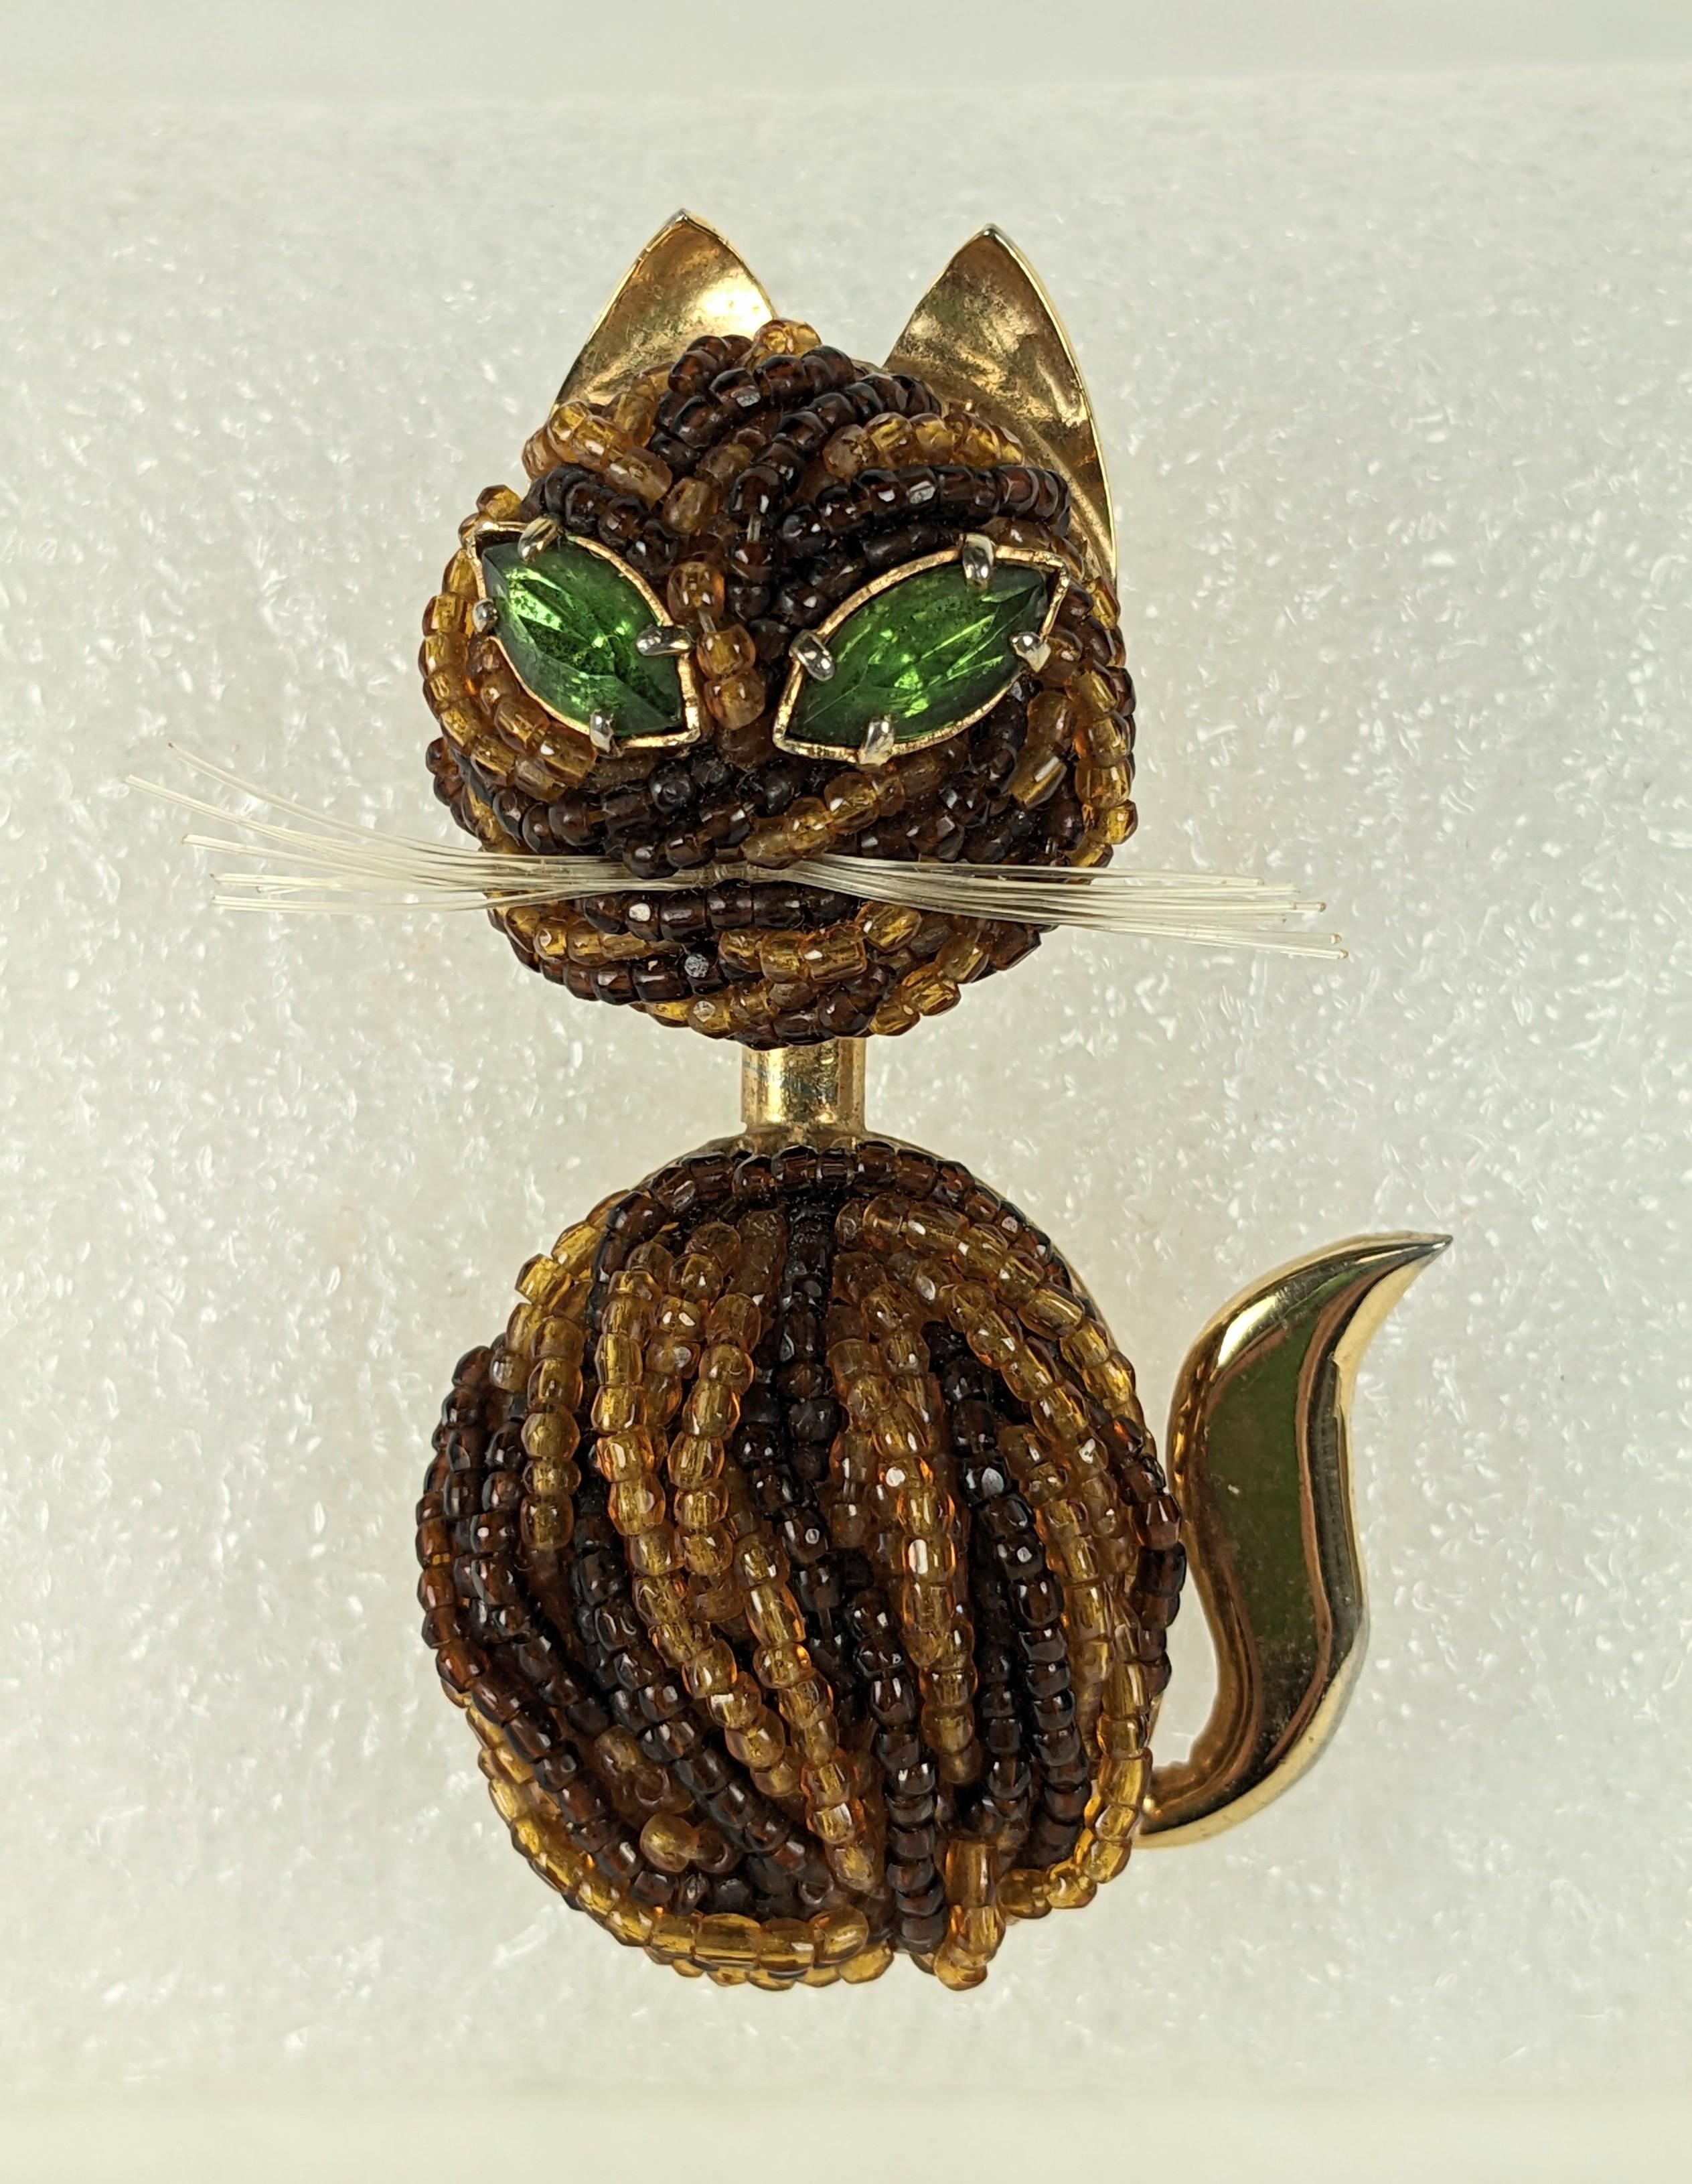 Italian Beaded Cat Brooch from the 1950's in the Coppola Toppo style. Deep brown and amber glass seed beads are hand sewn onto a gilt base with peridot paste eyes and nylon filament whiskers. 1950's Italy. Unsigned,possibly by Ornella. 2.5